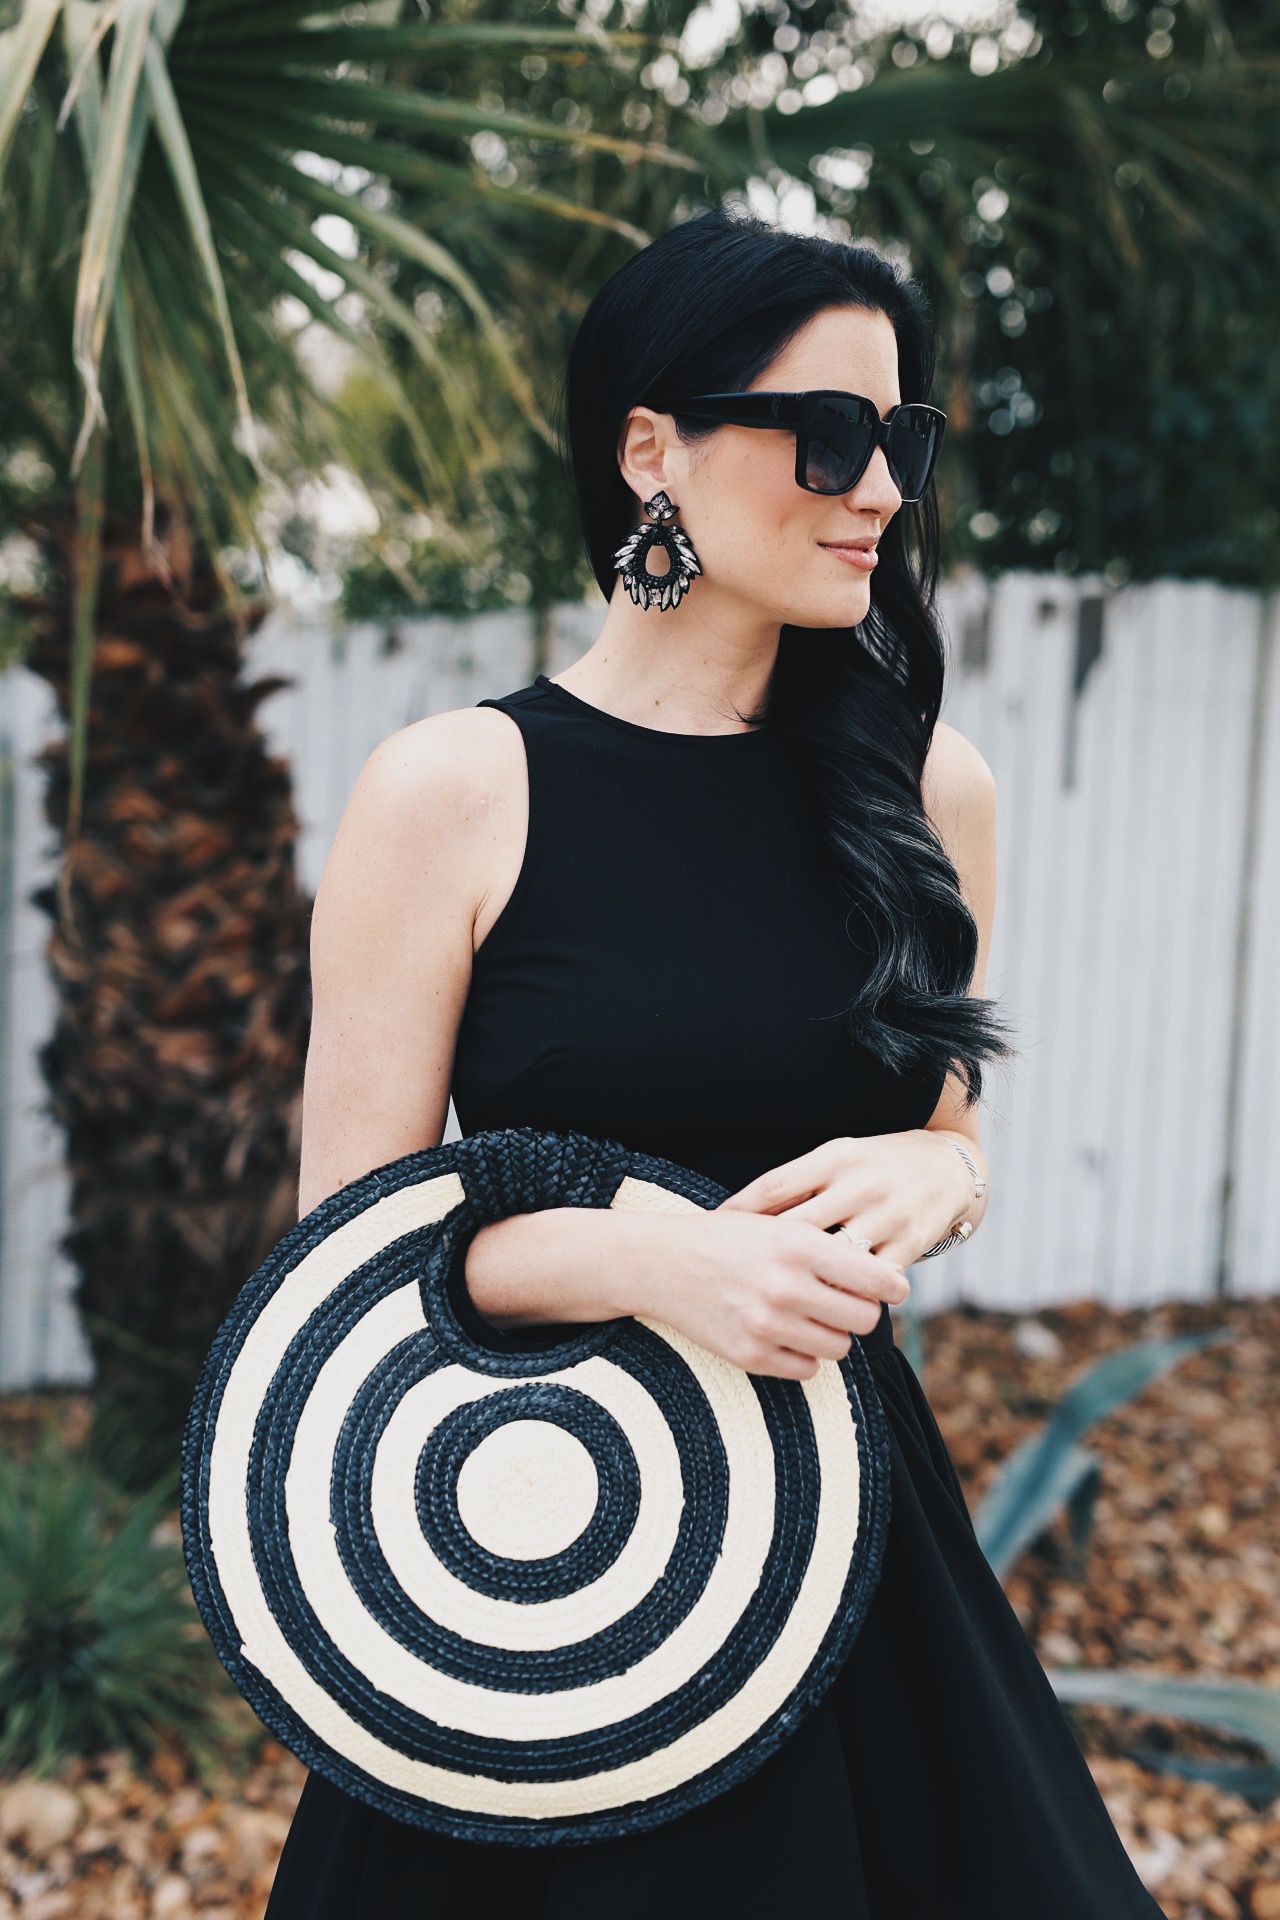 DTKAustin shares one of her most dramatic summer looks; a back two piece, high low skirt set from Akira with a straw round bag from Anthropologie.